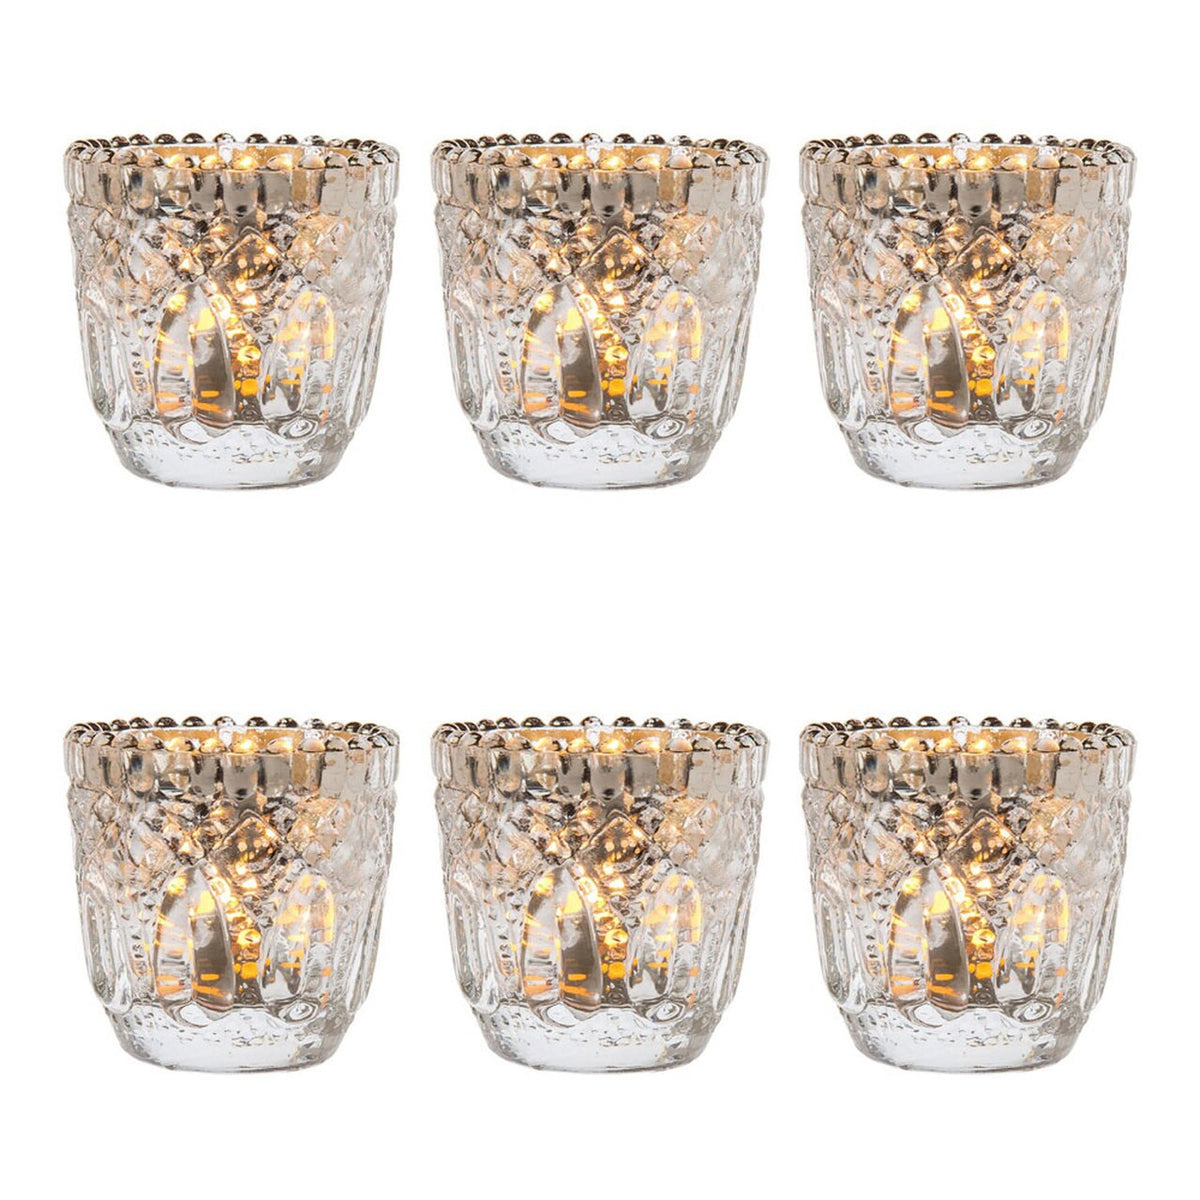 6 Pack | Faceted Vintage Mercury Glass Candle Holders (2.75-Inches, Lillian Design, Silver) - For Use with Tea Lights - For Home Decor, Parties and Wedding Decorations - PaperLanternStore.com - Paper Lanterns, Decor, Party Lights &amp; More